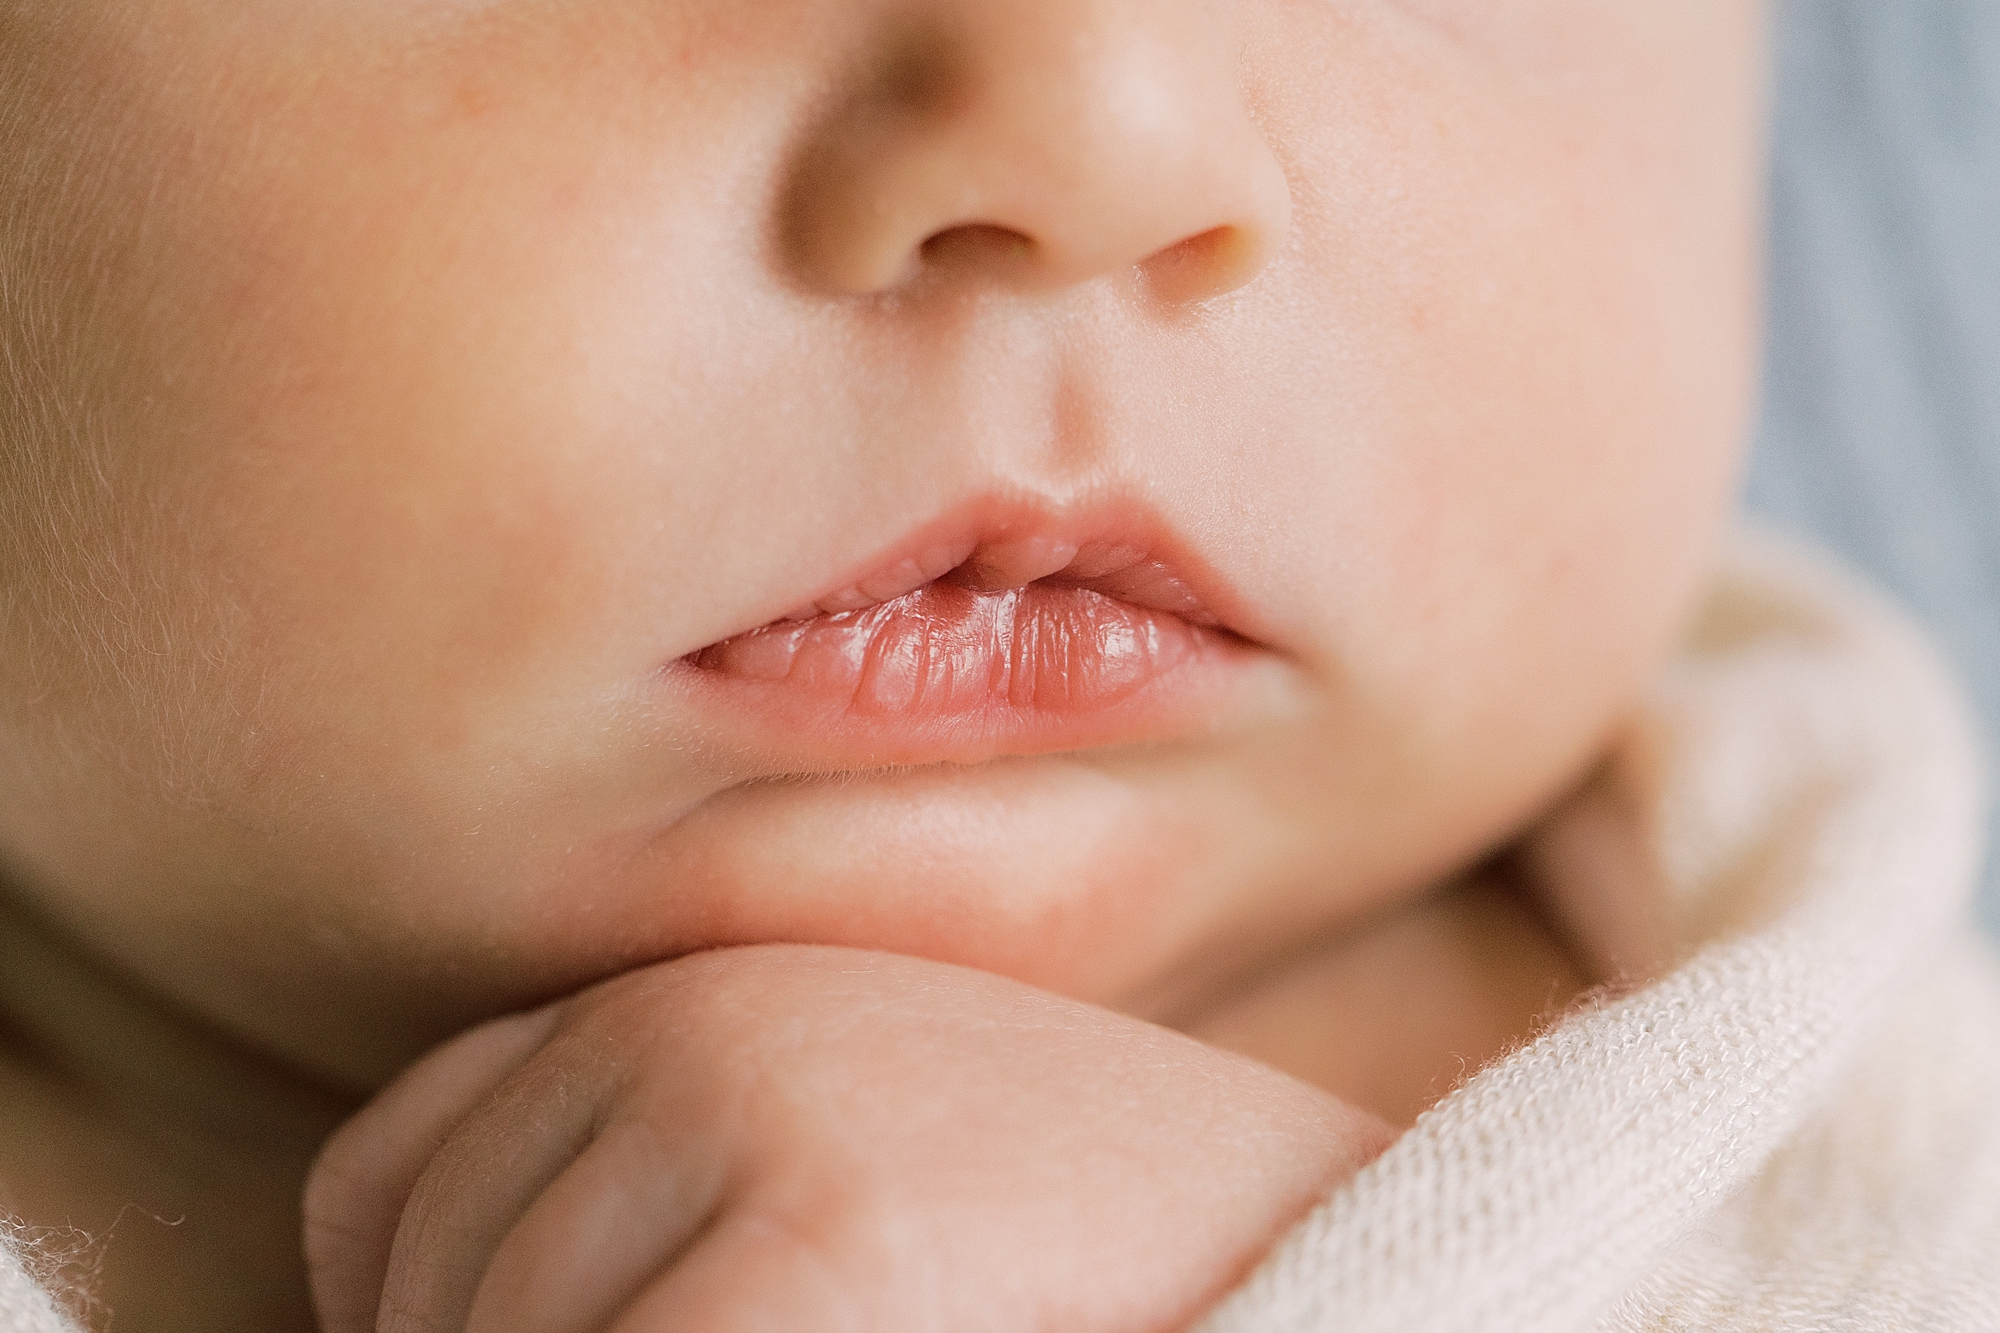 close up of baby's lips